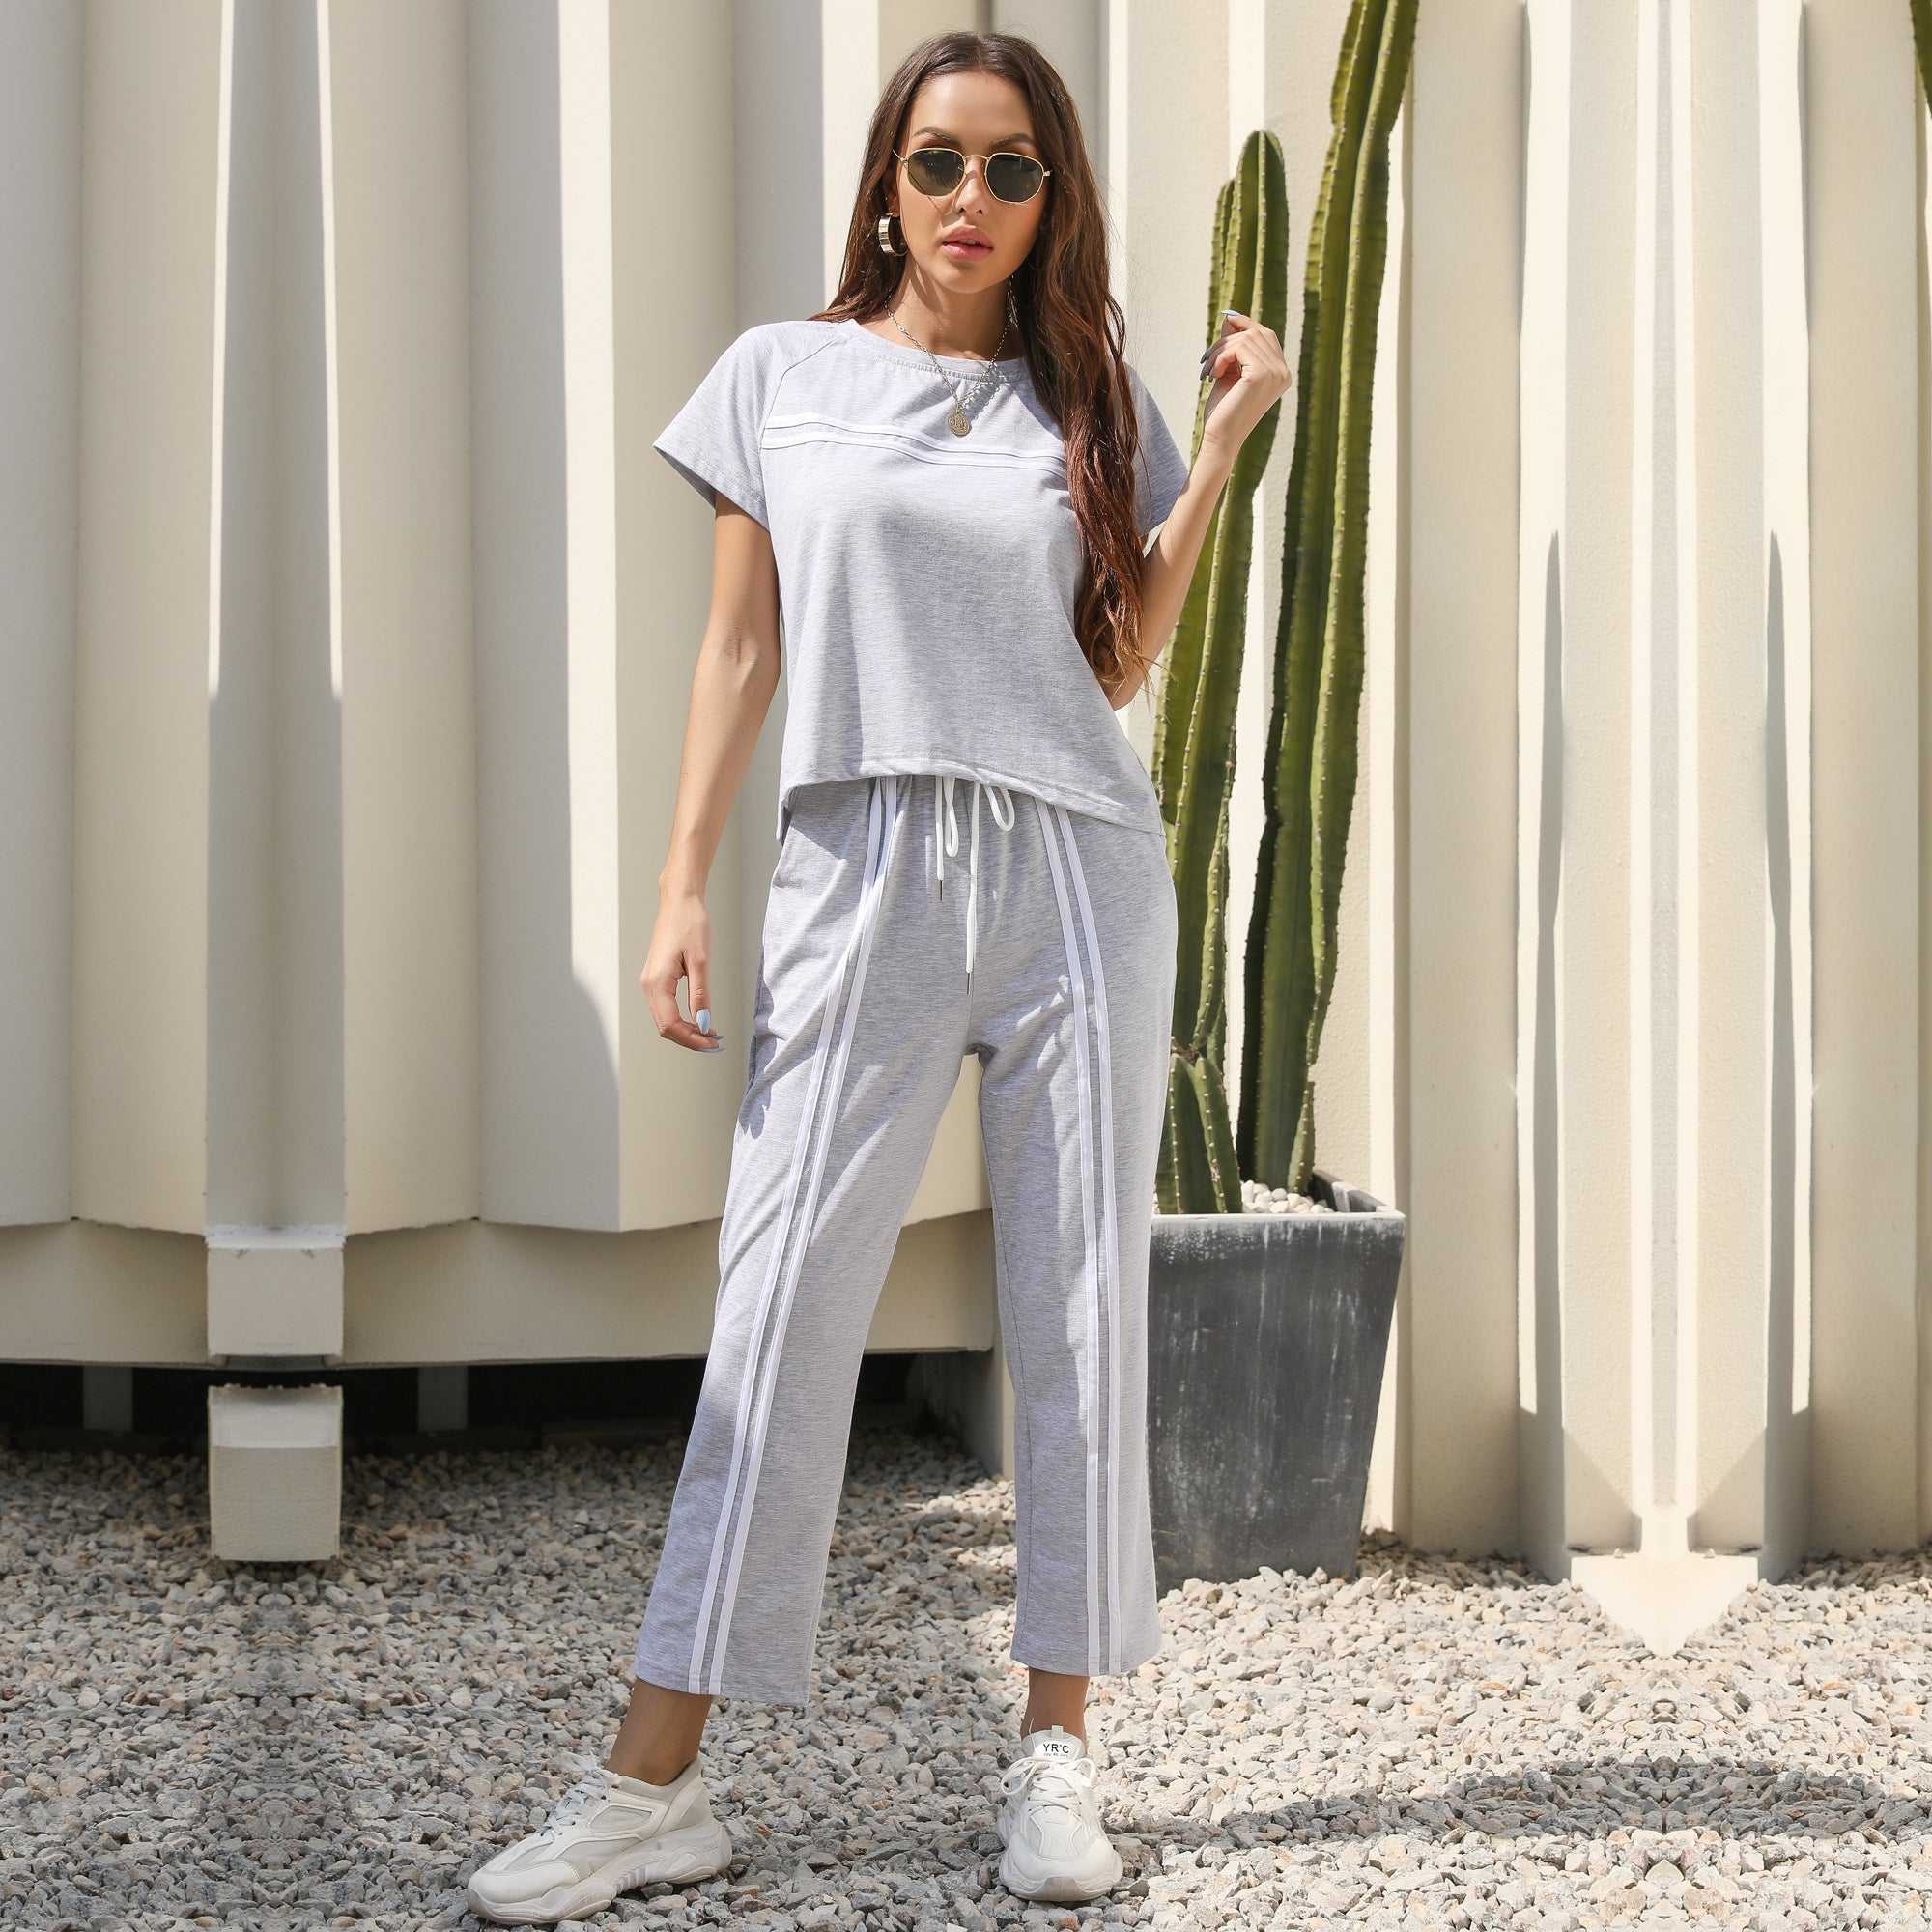 Short-sleeved Shirt Striped Round Neck T-shirt Home Casual Suit Sai Feel